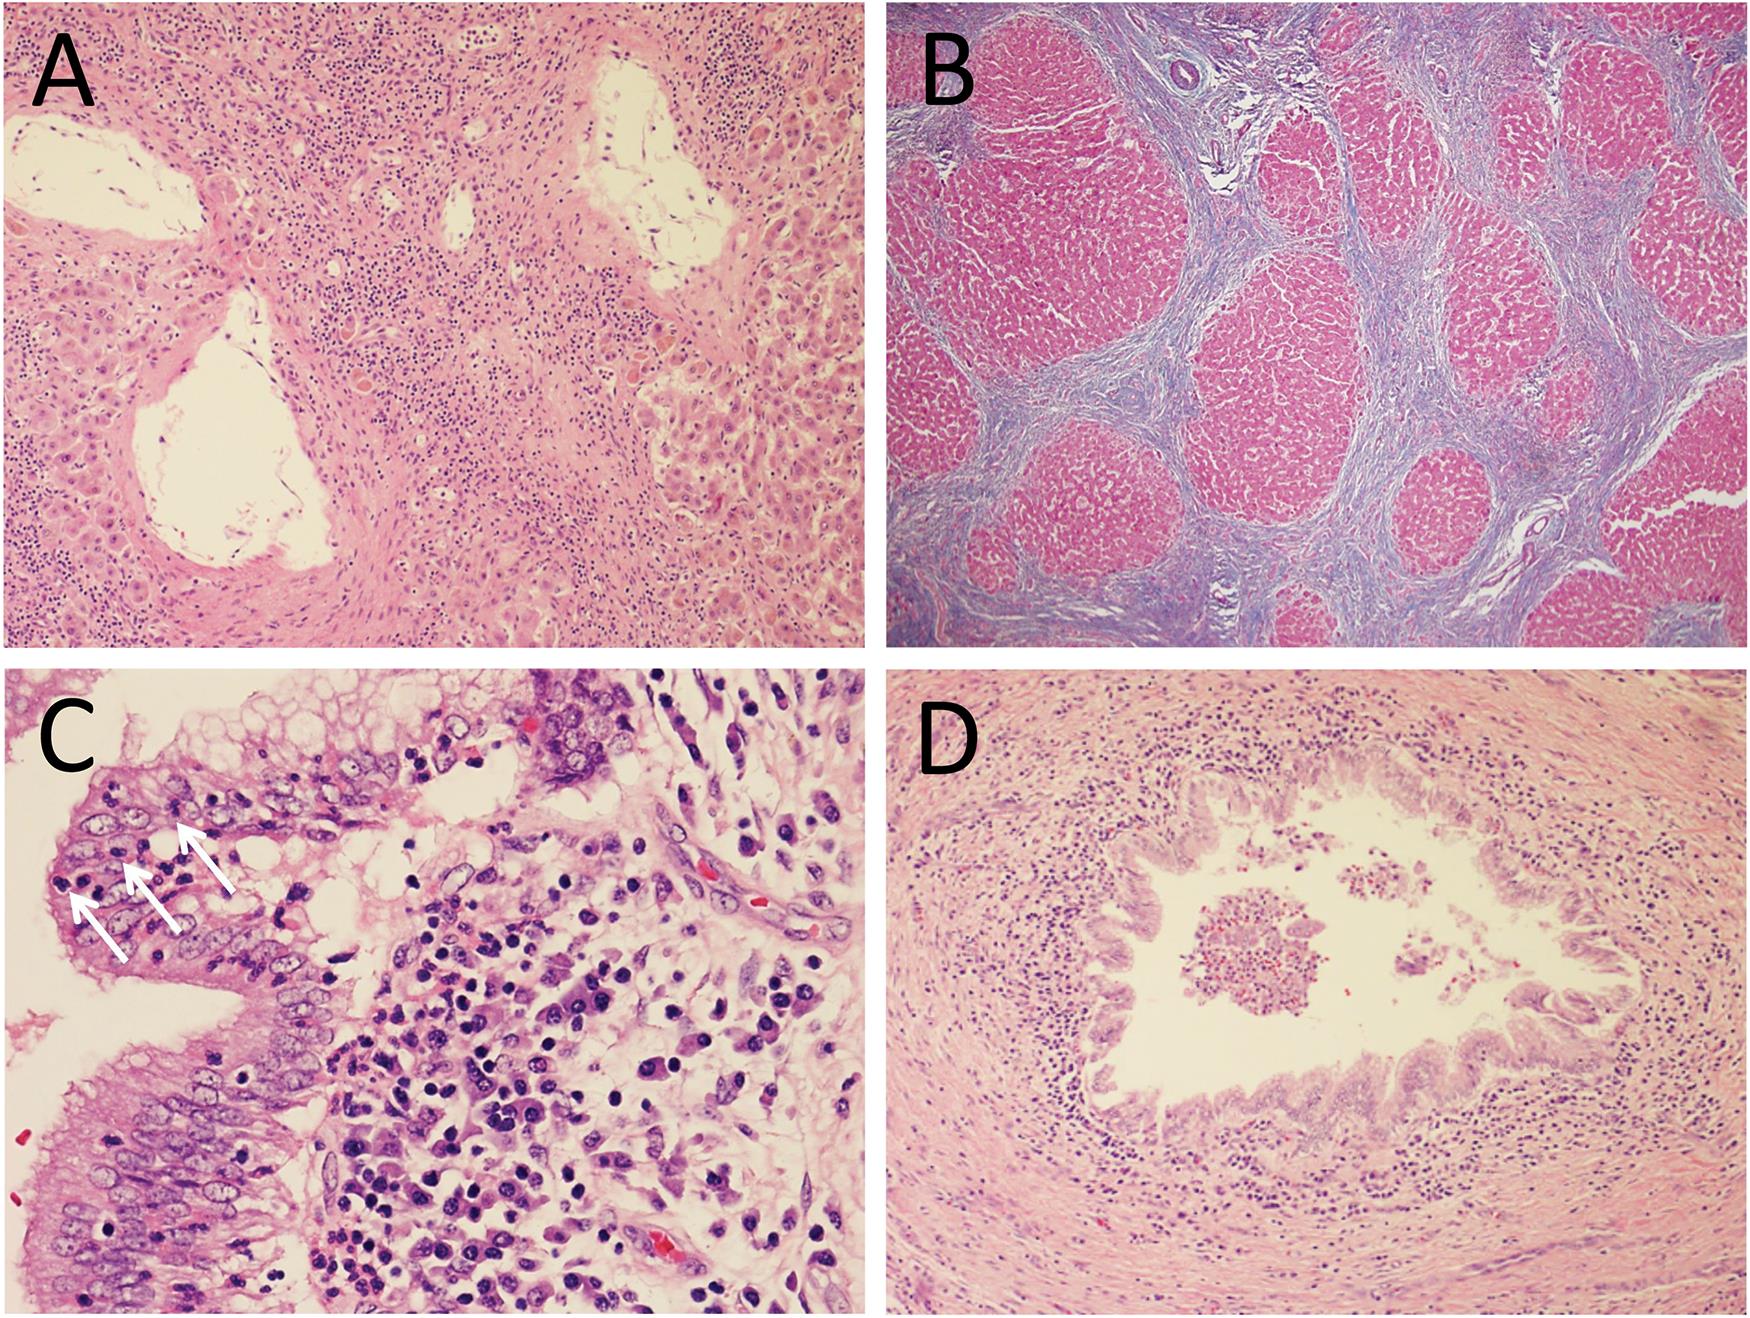 (A) Portal tract with preserved vascular structures, without accompanying bile duct, consistent with the patient’s diagnosis of PSC; H&E stain, 100×. (B) Trichrome stain highlights cirrhotic liver parenchyma; MT stain, 100×. (C) Bile duct with numerous intraepithelial neutrophils (arrows); H&E stain, 400×. (D) Large bile duct with intraluminal collections of neutrophils; H&E stain, 100×.